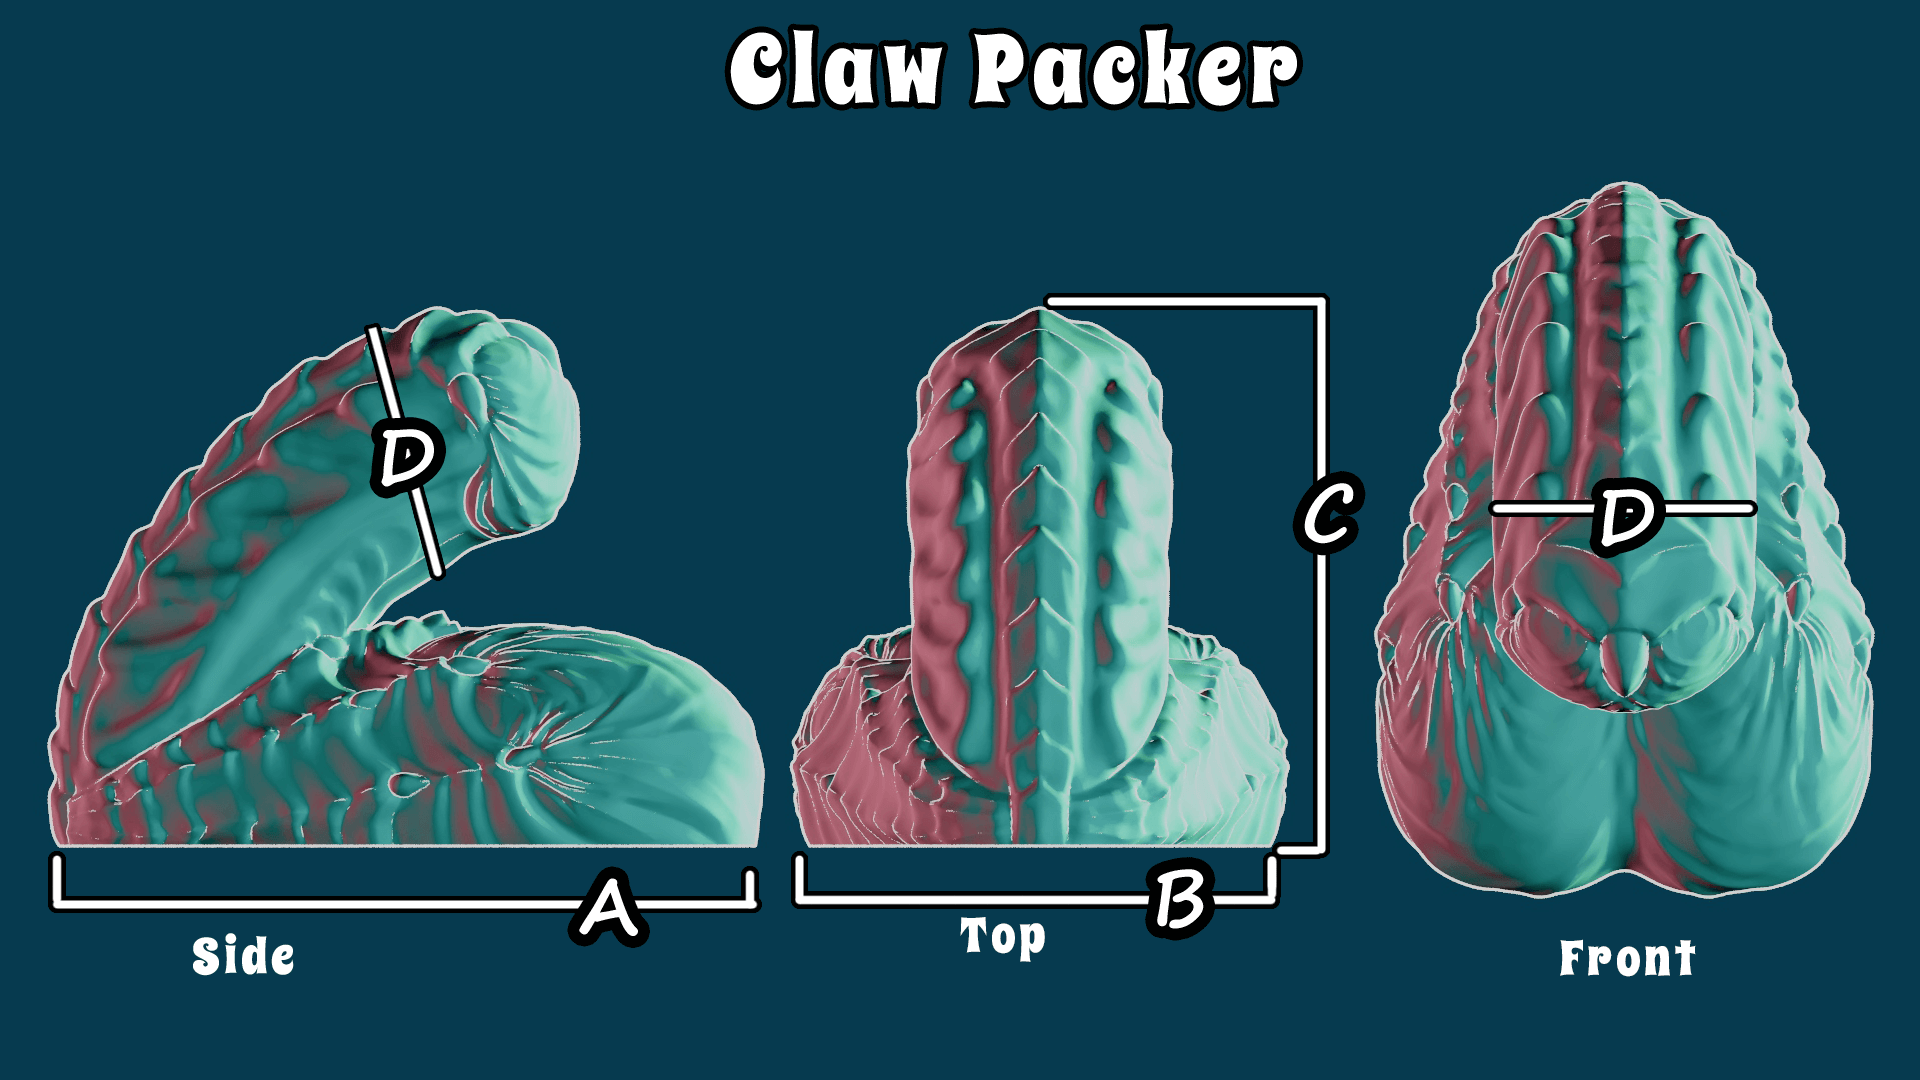 *Claw Packer